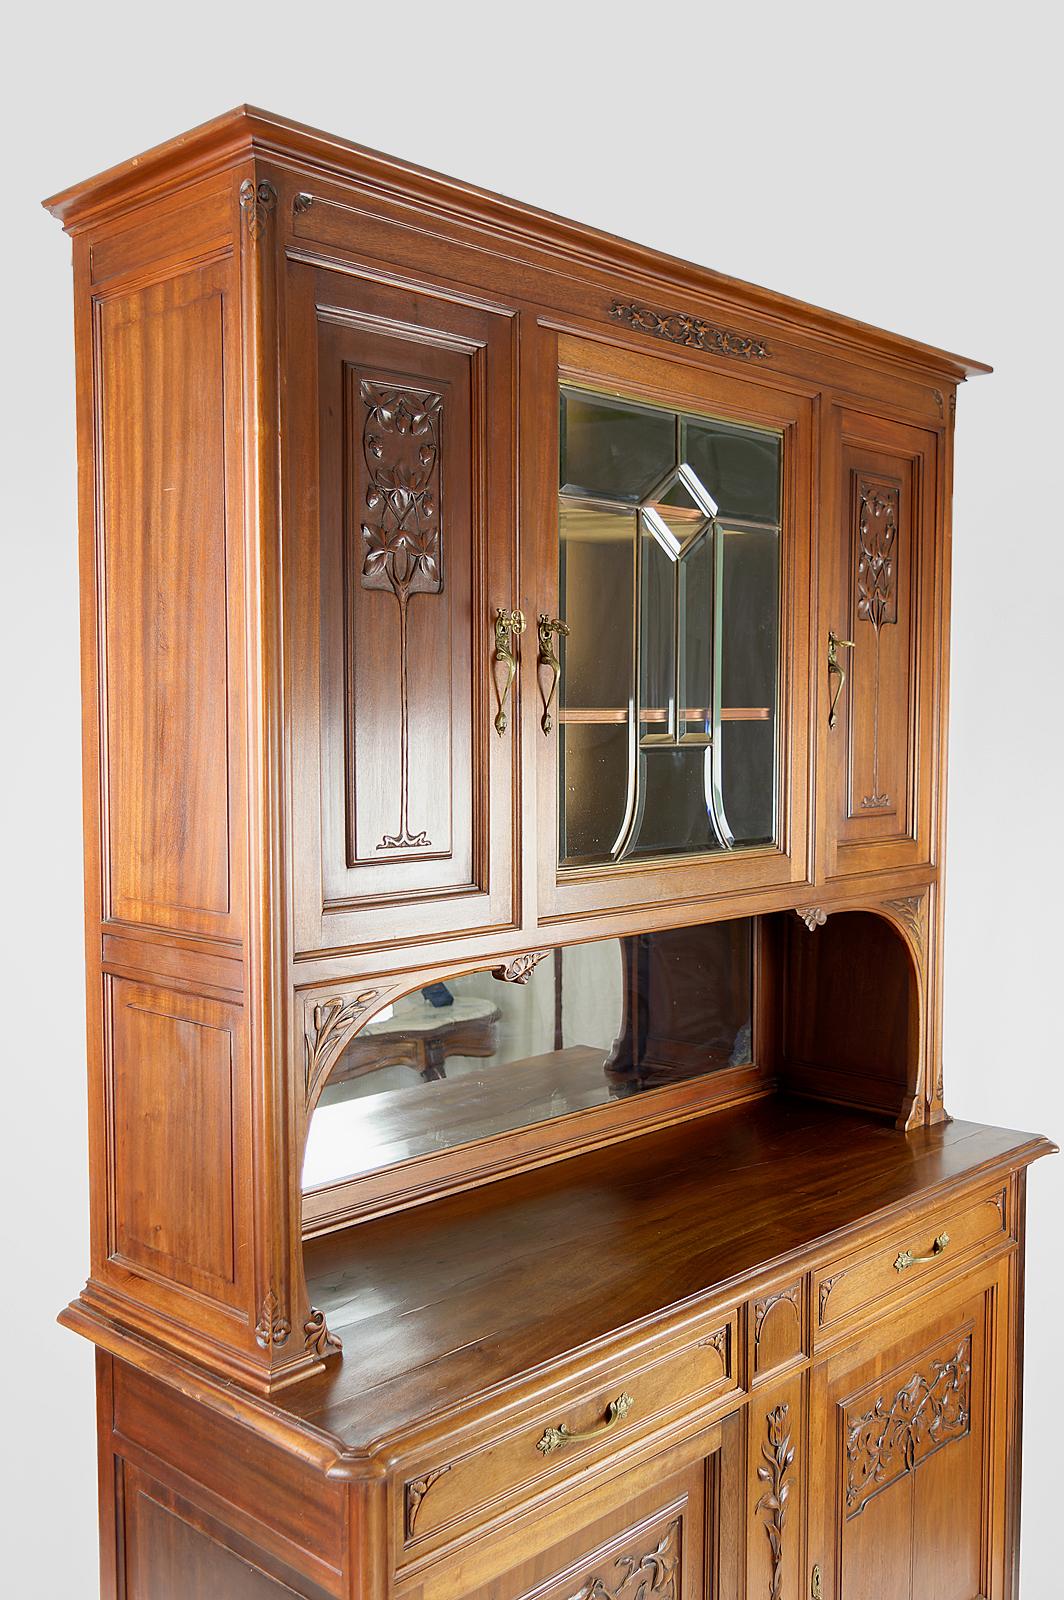 French Art Nouveau Sideboard in Carved Walnut with Stained Glass, circa 1910 For Sale 1